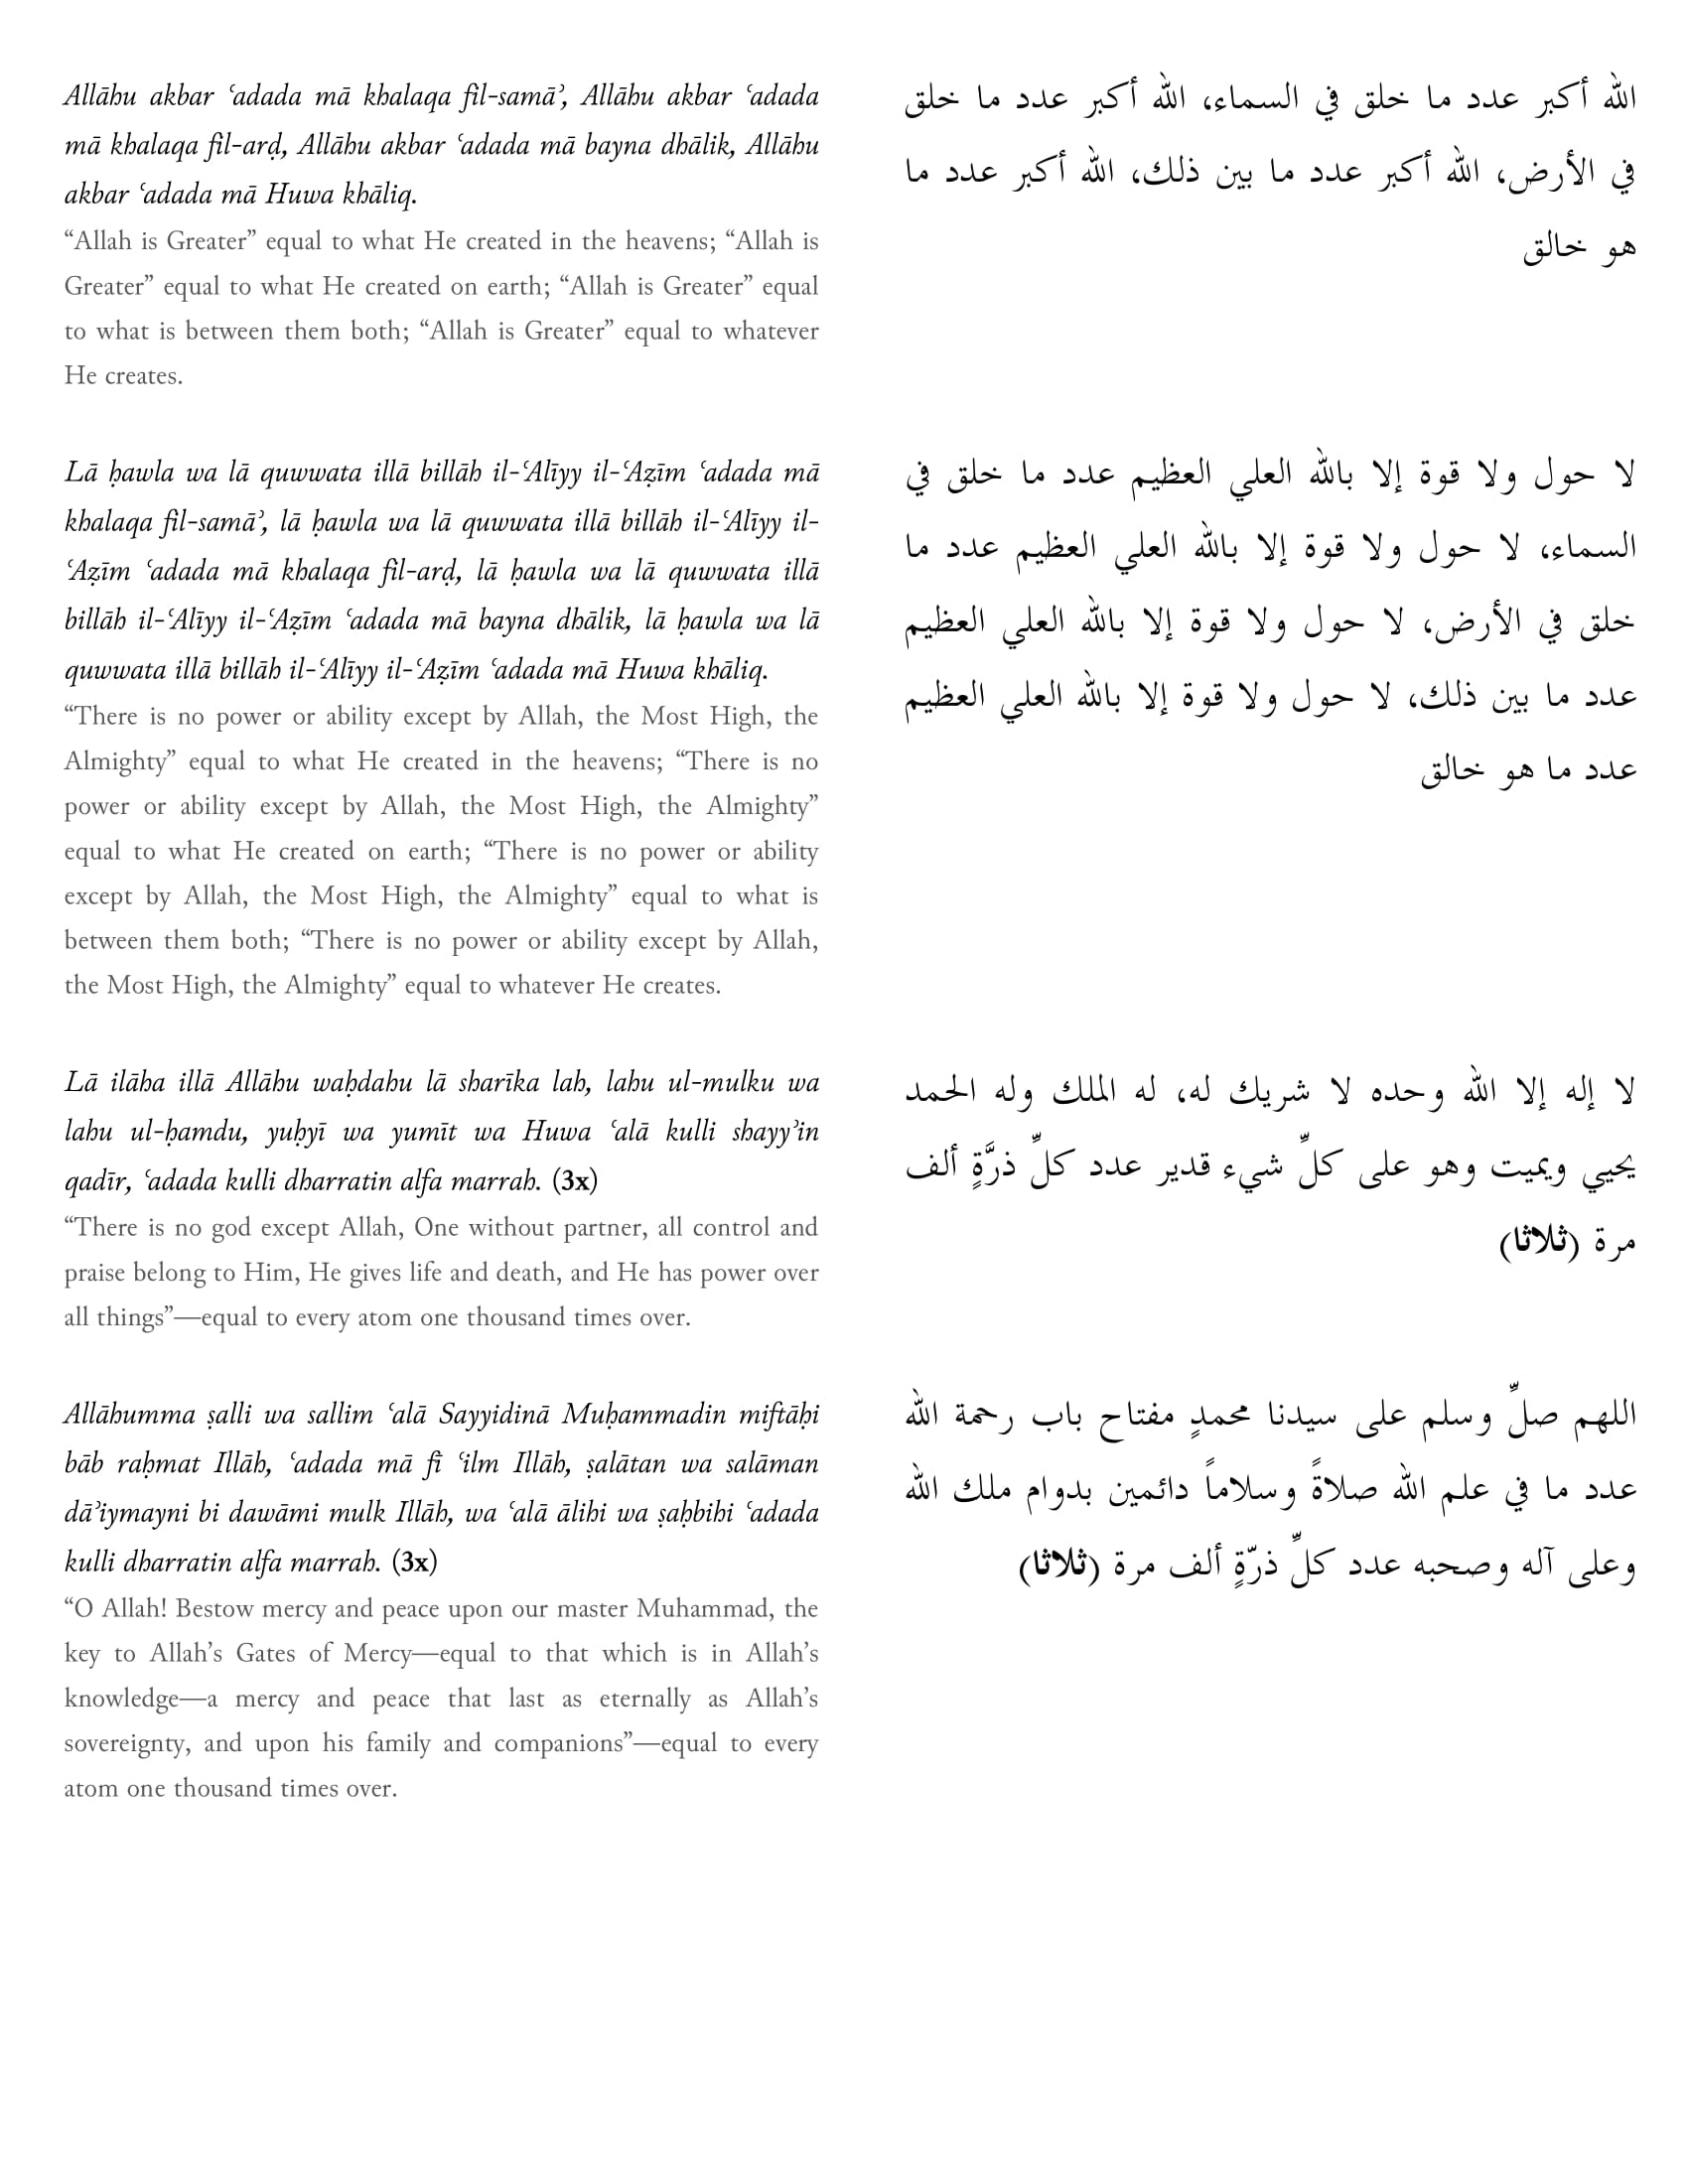 The Complete Wird Latif Of Imam Al Haddad With Transliteration